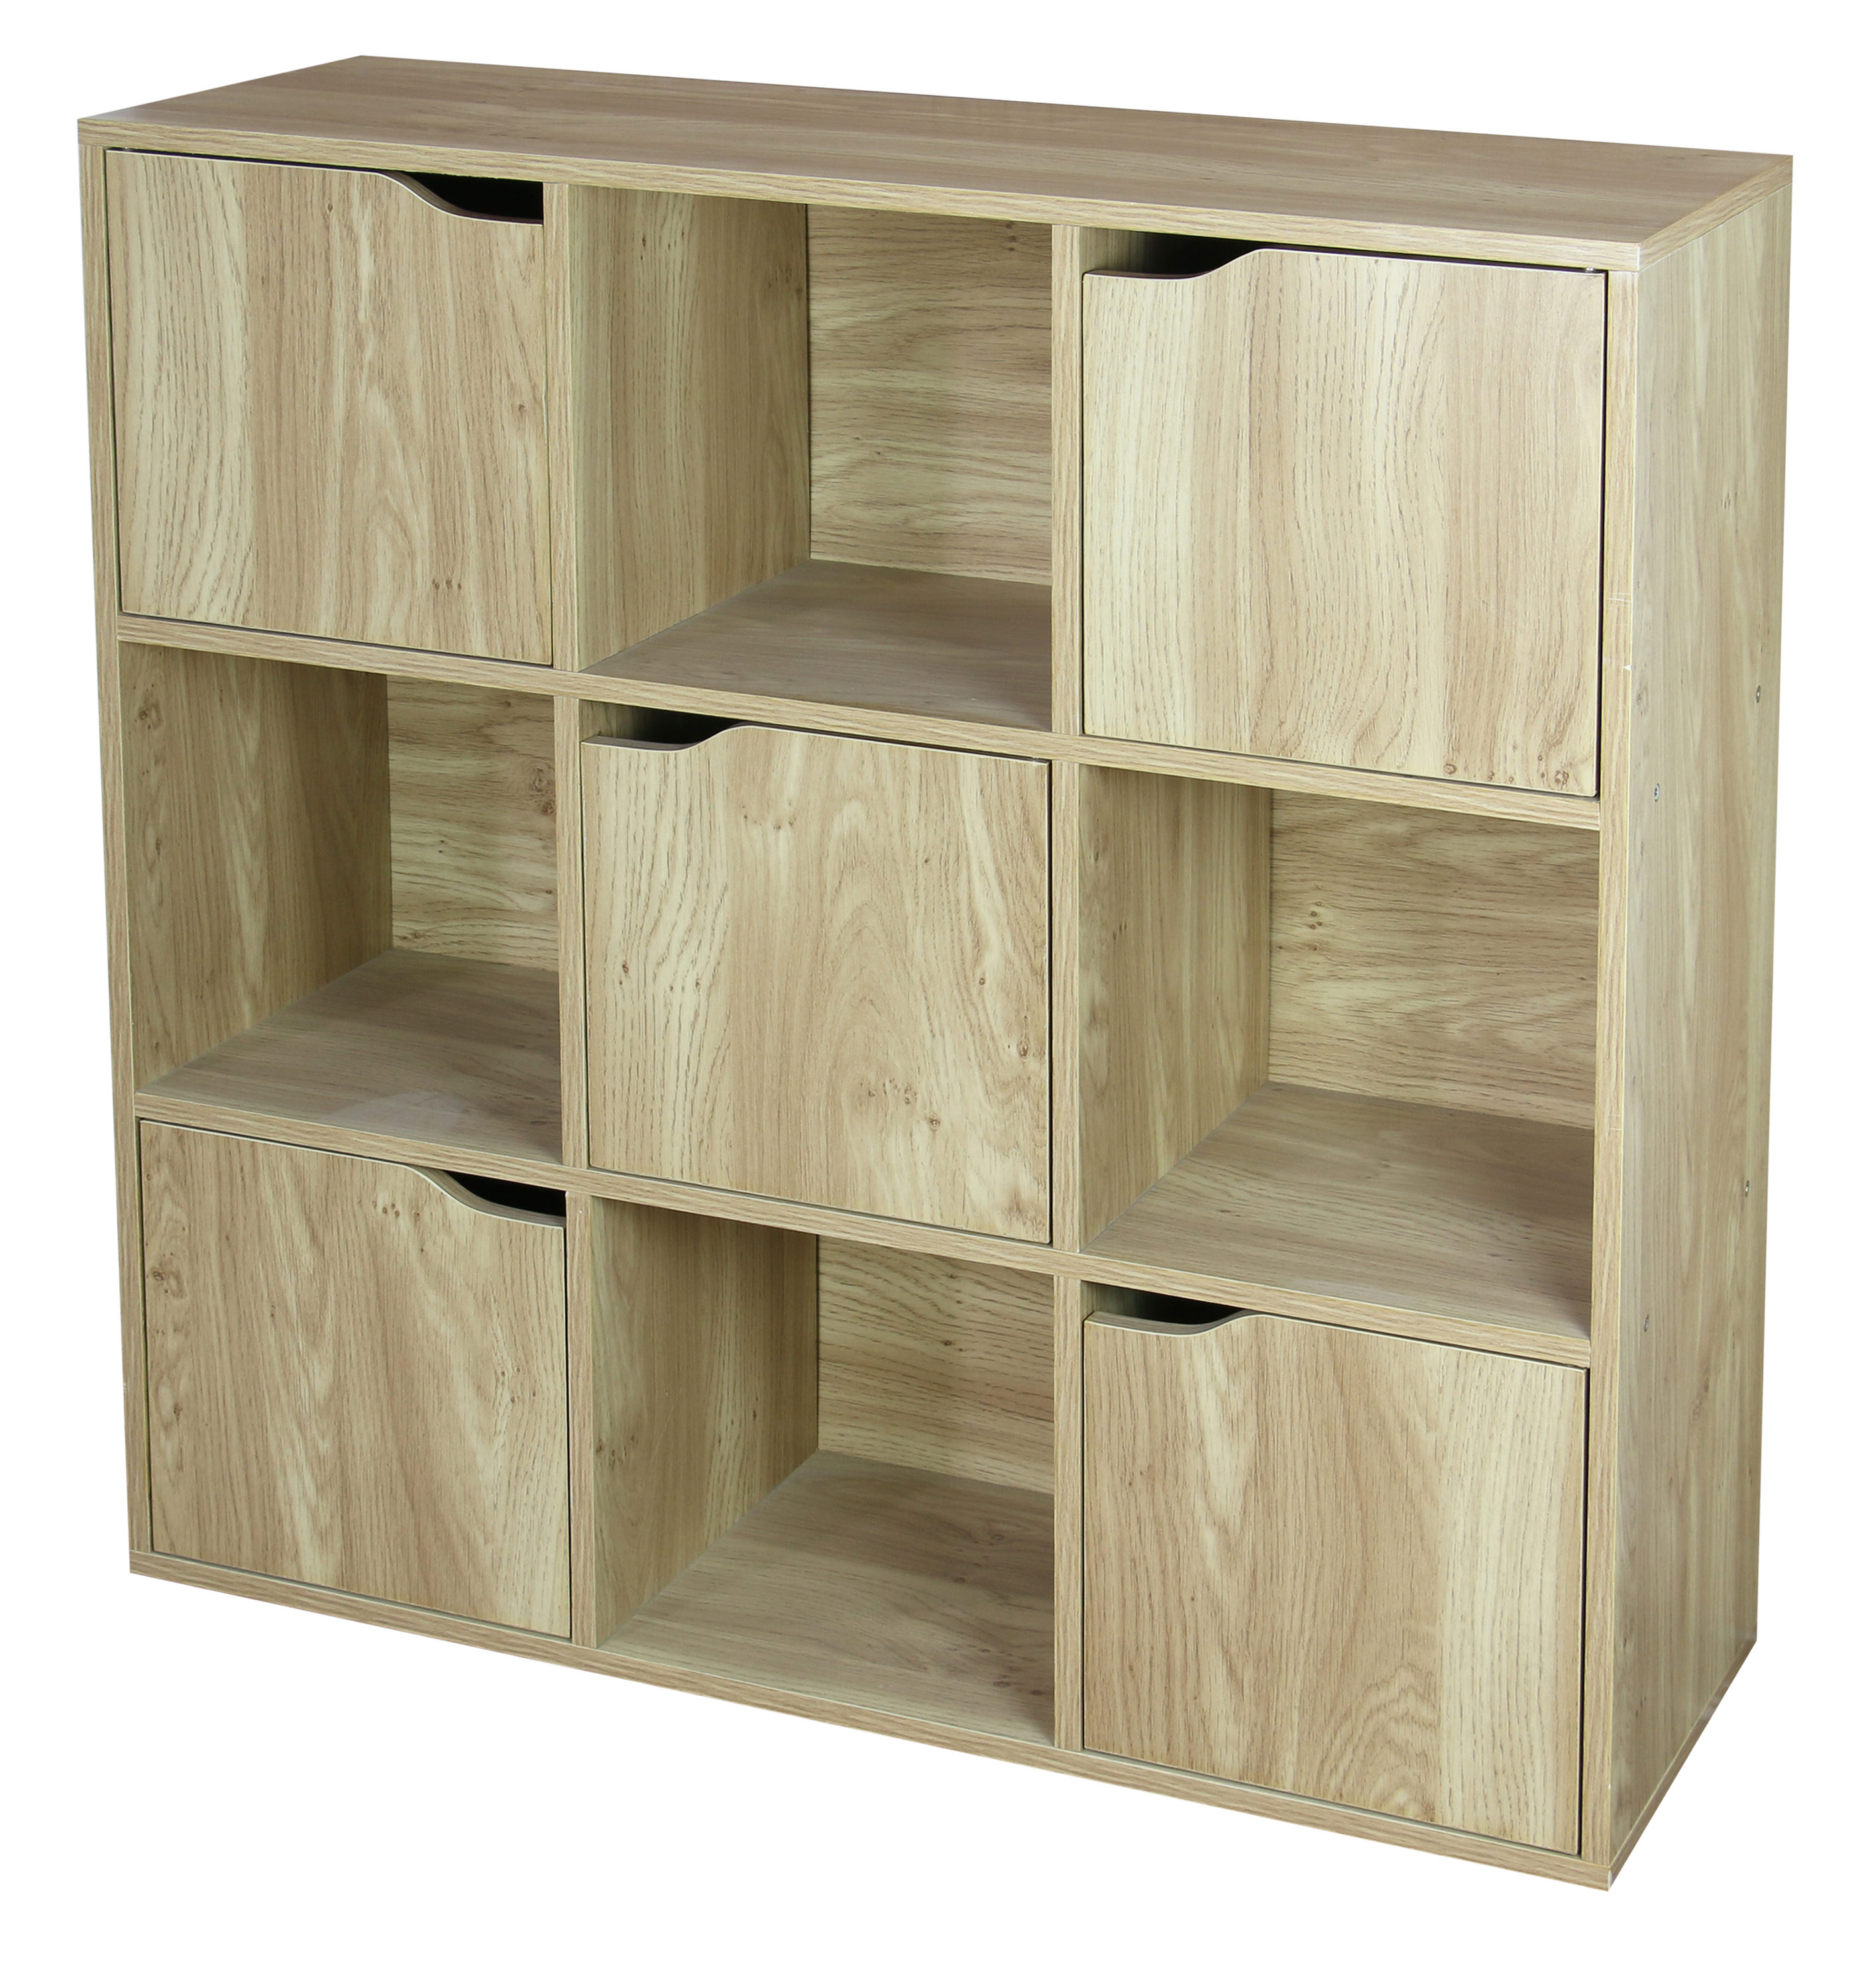 9 Cube Organizer In The Storage Cubes, Stackable Wooden Storage Cubes With Doors